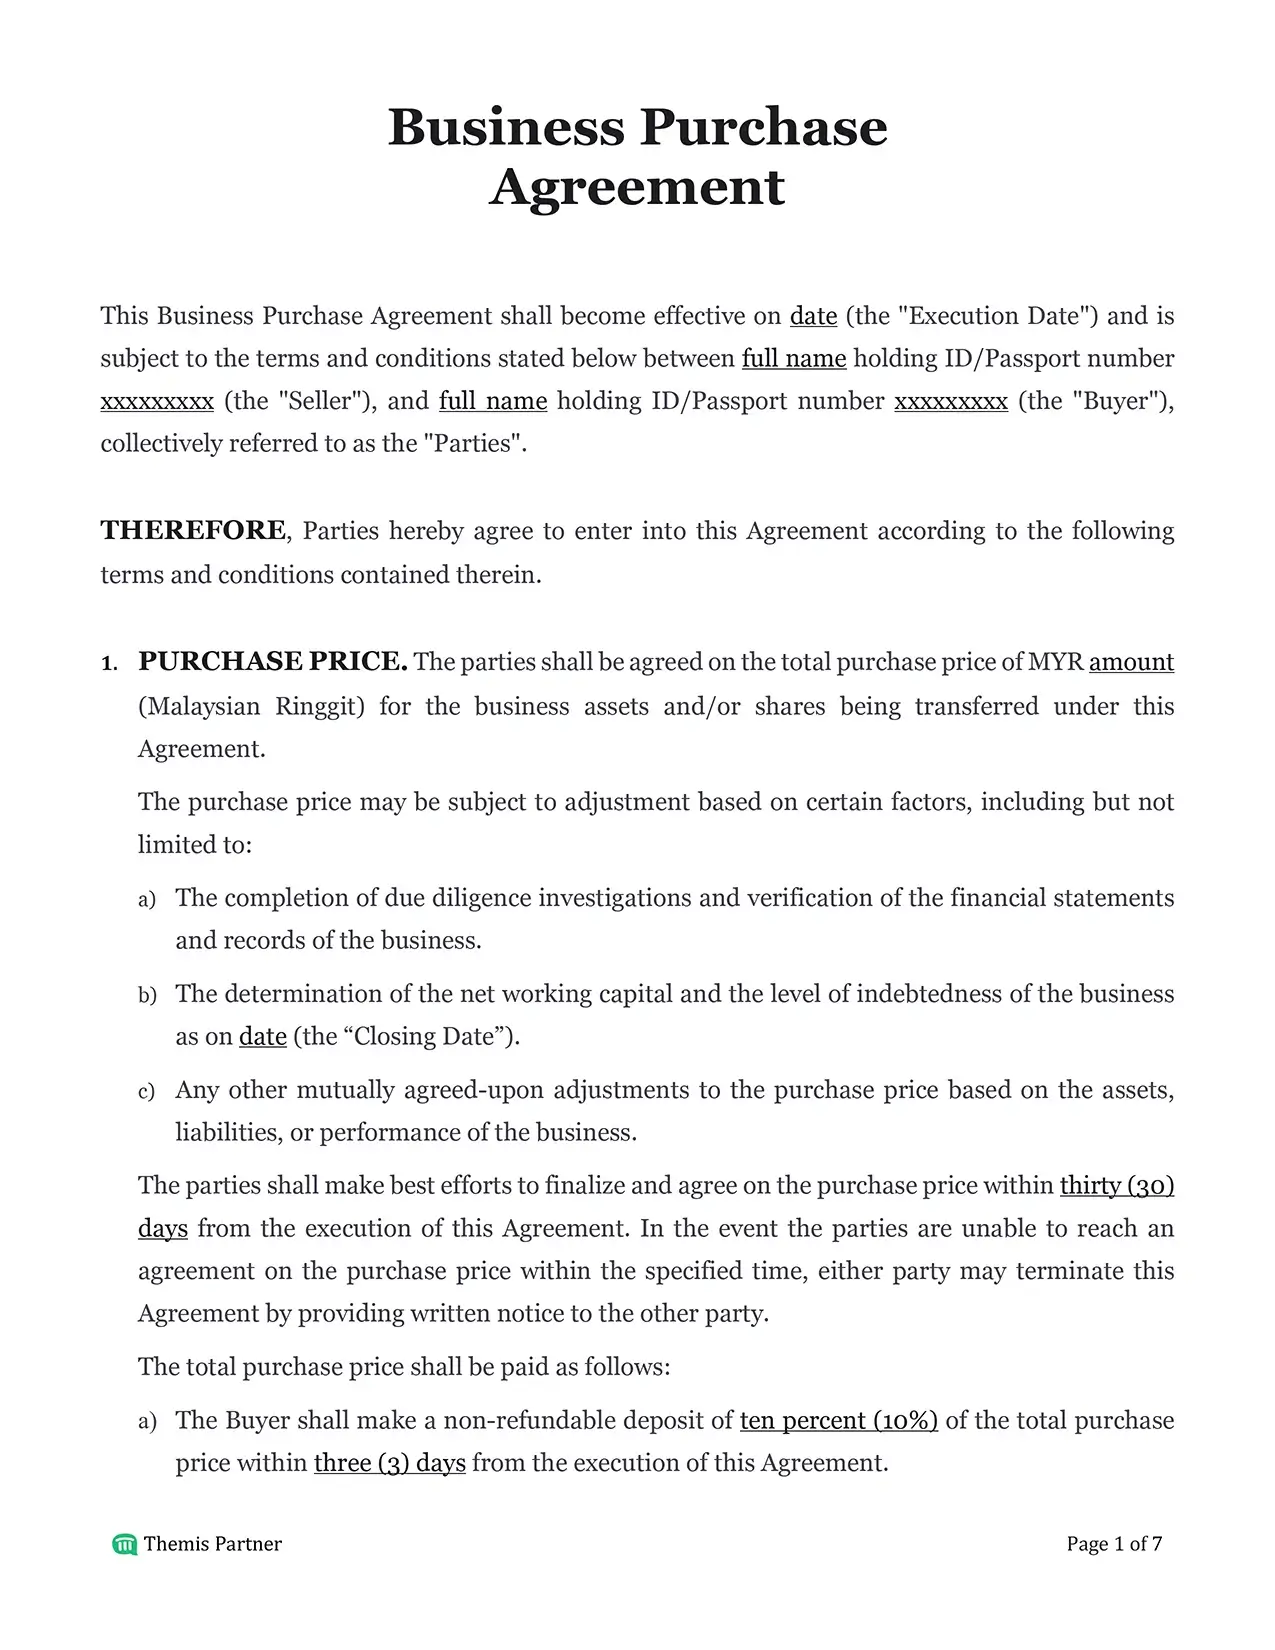 Business purchase agreement Malaysia 1